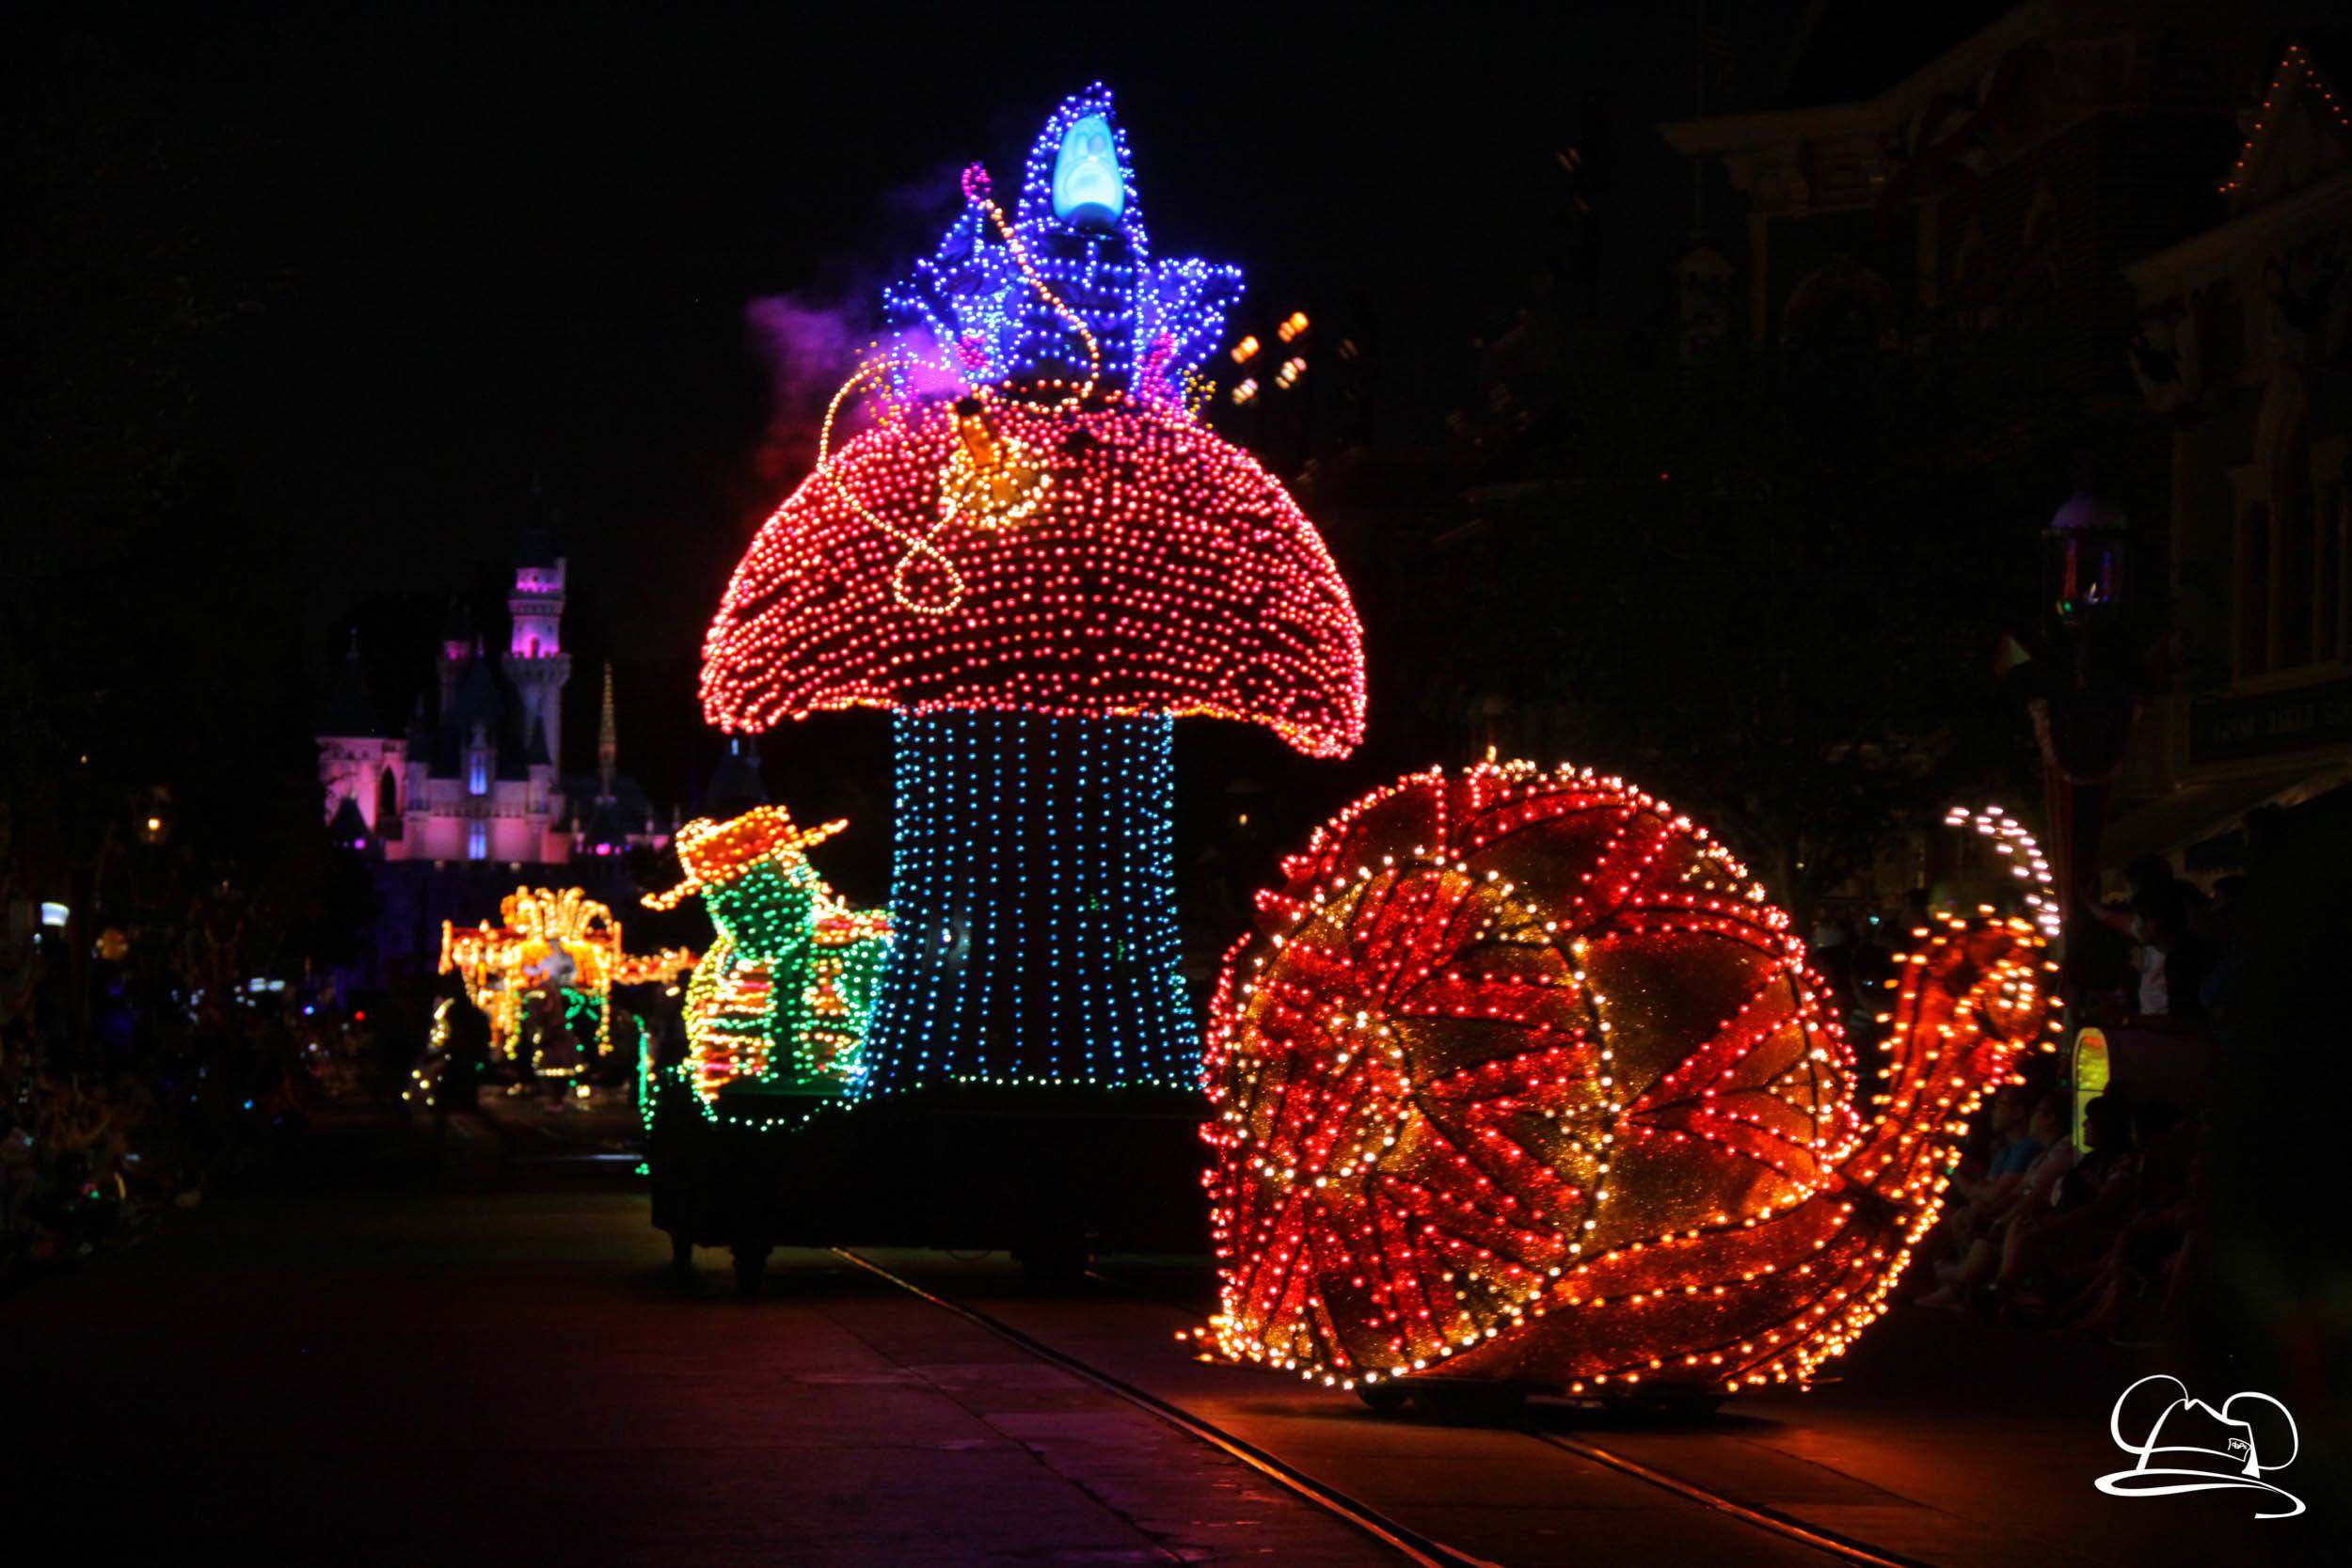 Main Street Electrical Parade Says Goodbye to Disneyland August 20th